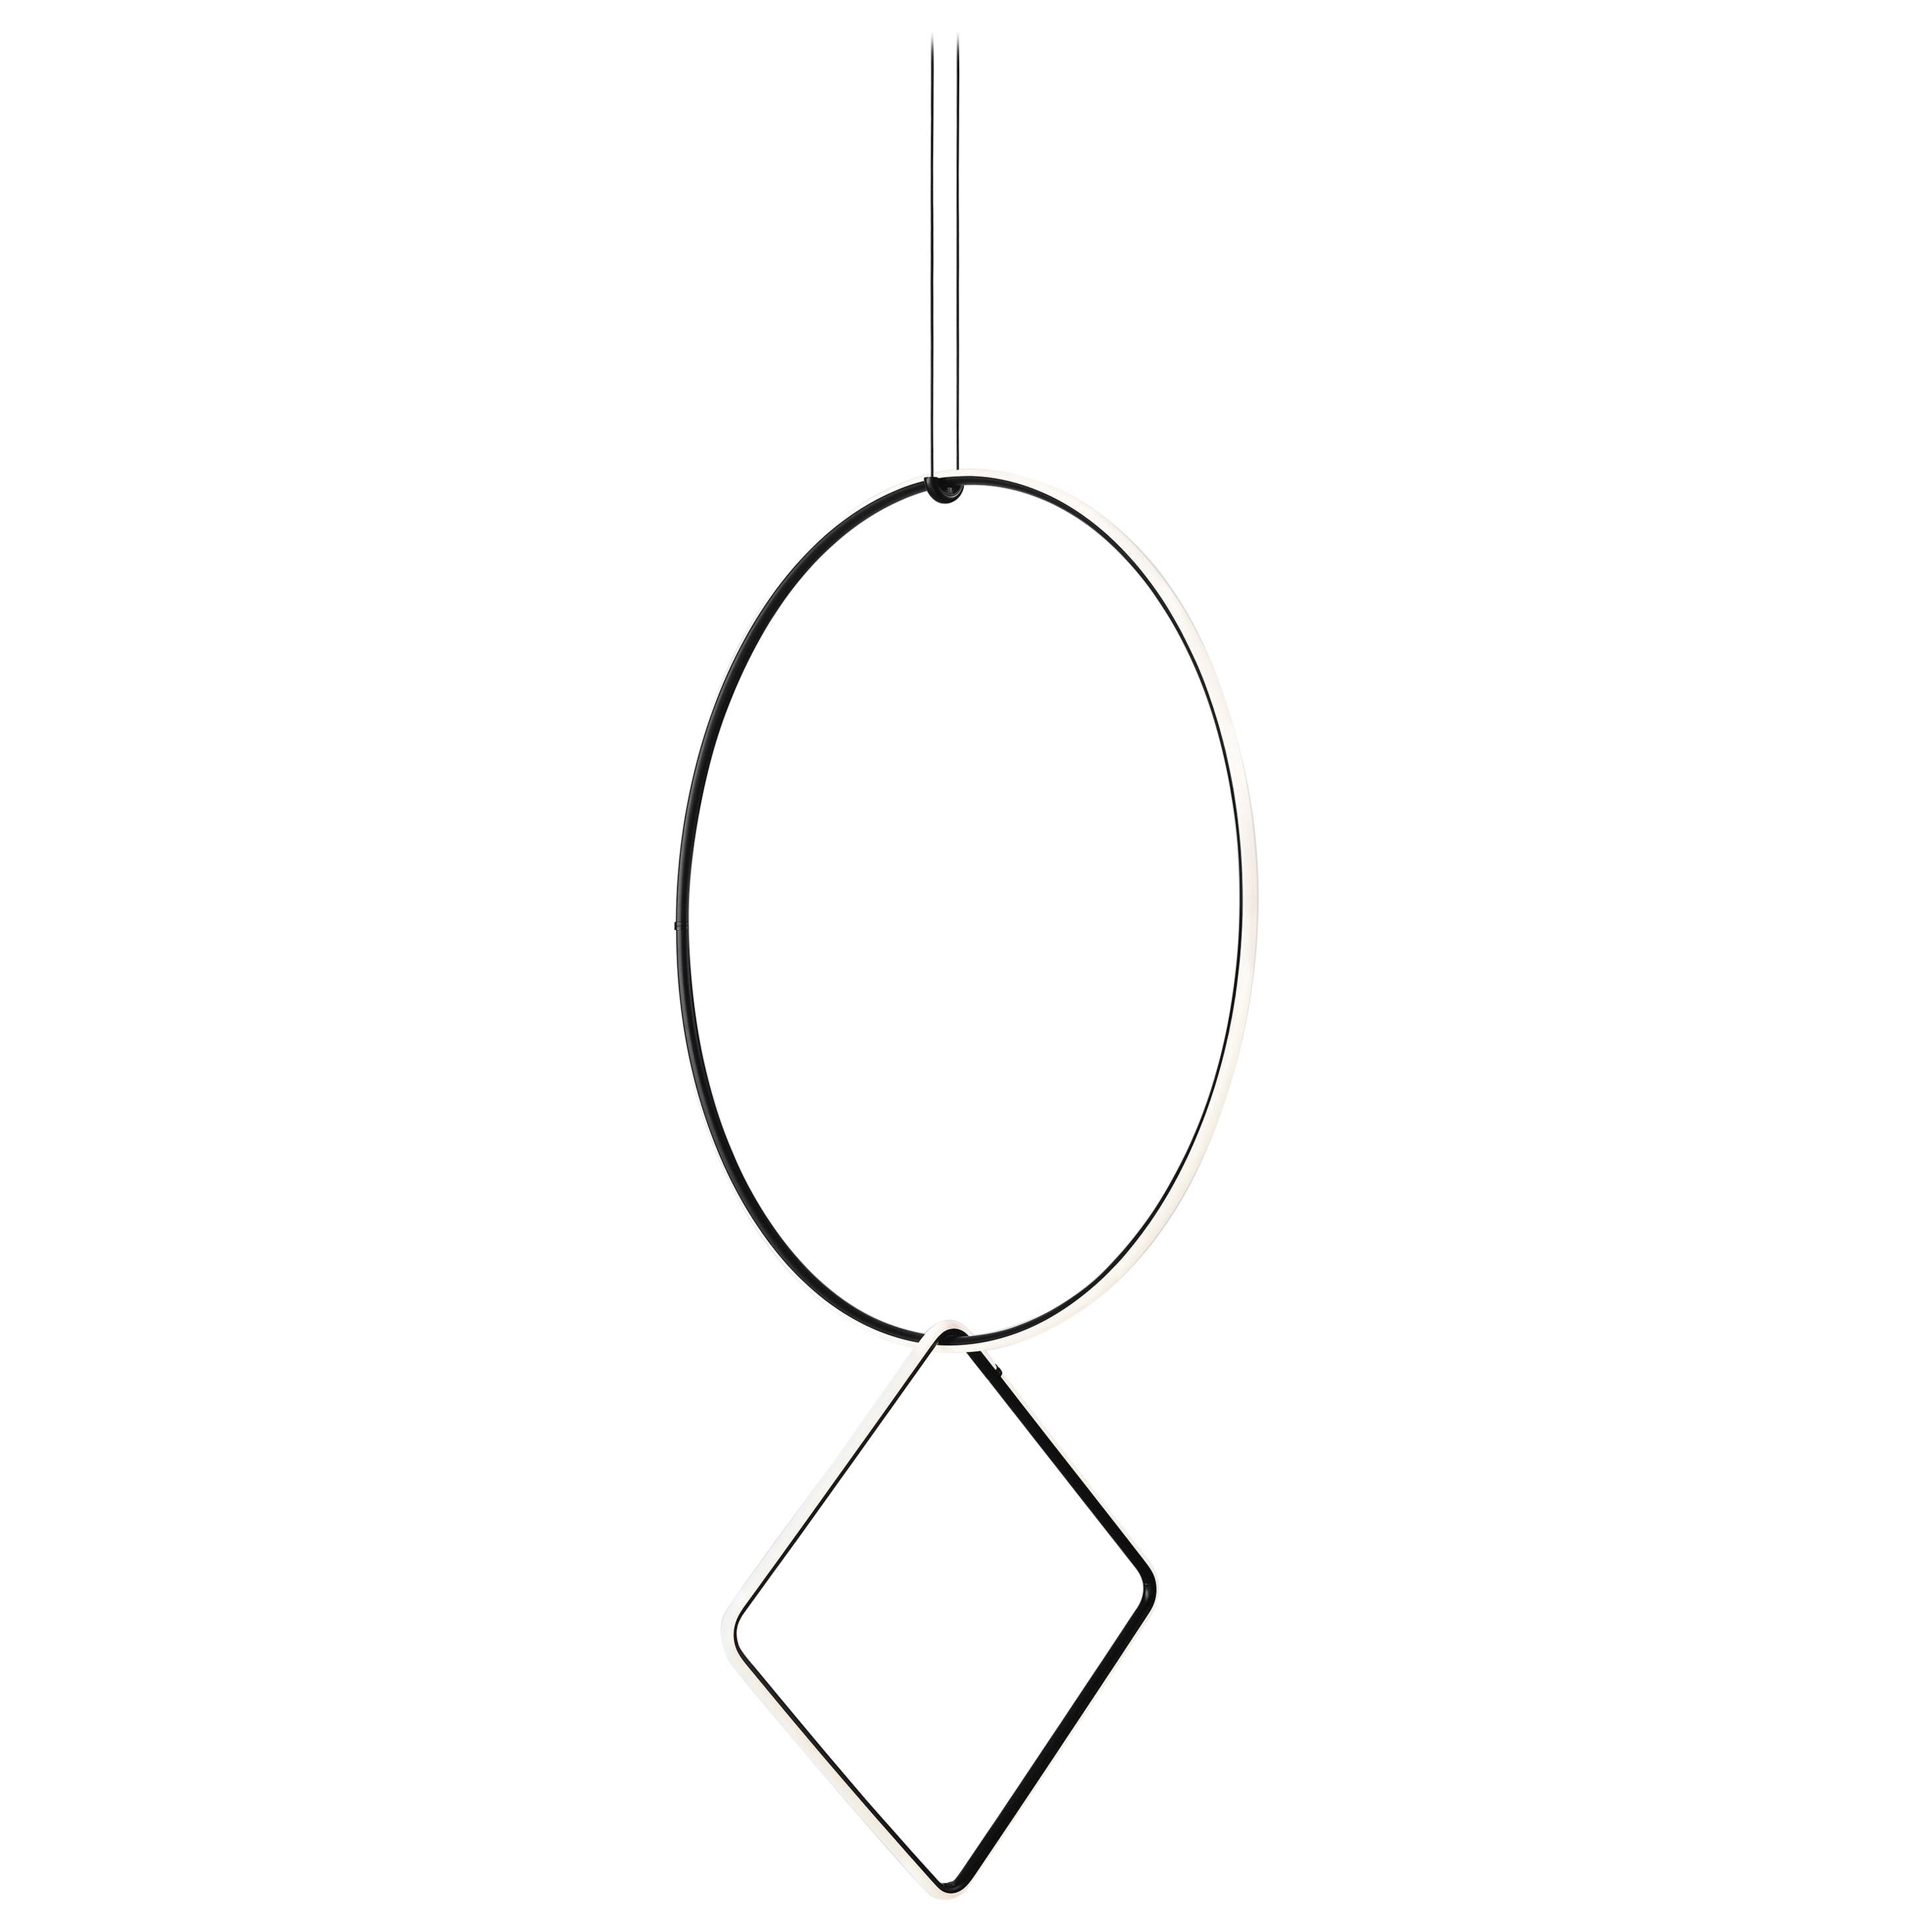 FLOS Large Circle and Square Arrangements Light by Michael Anastassiades For Sale